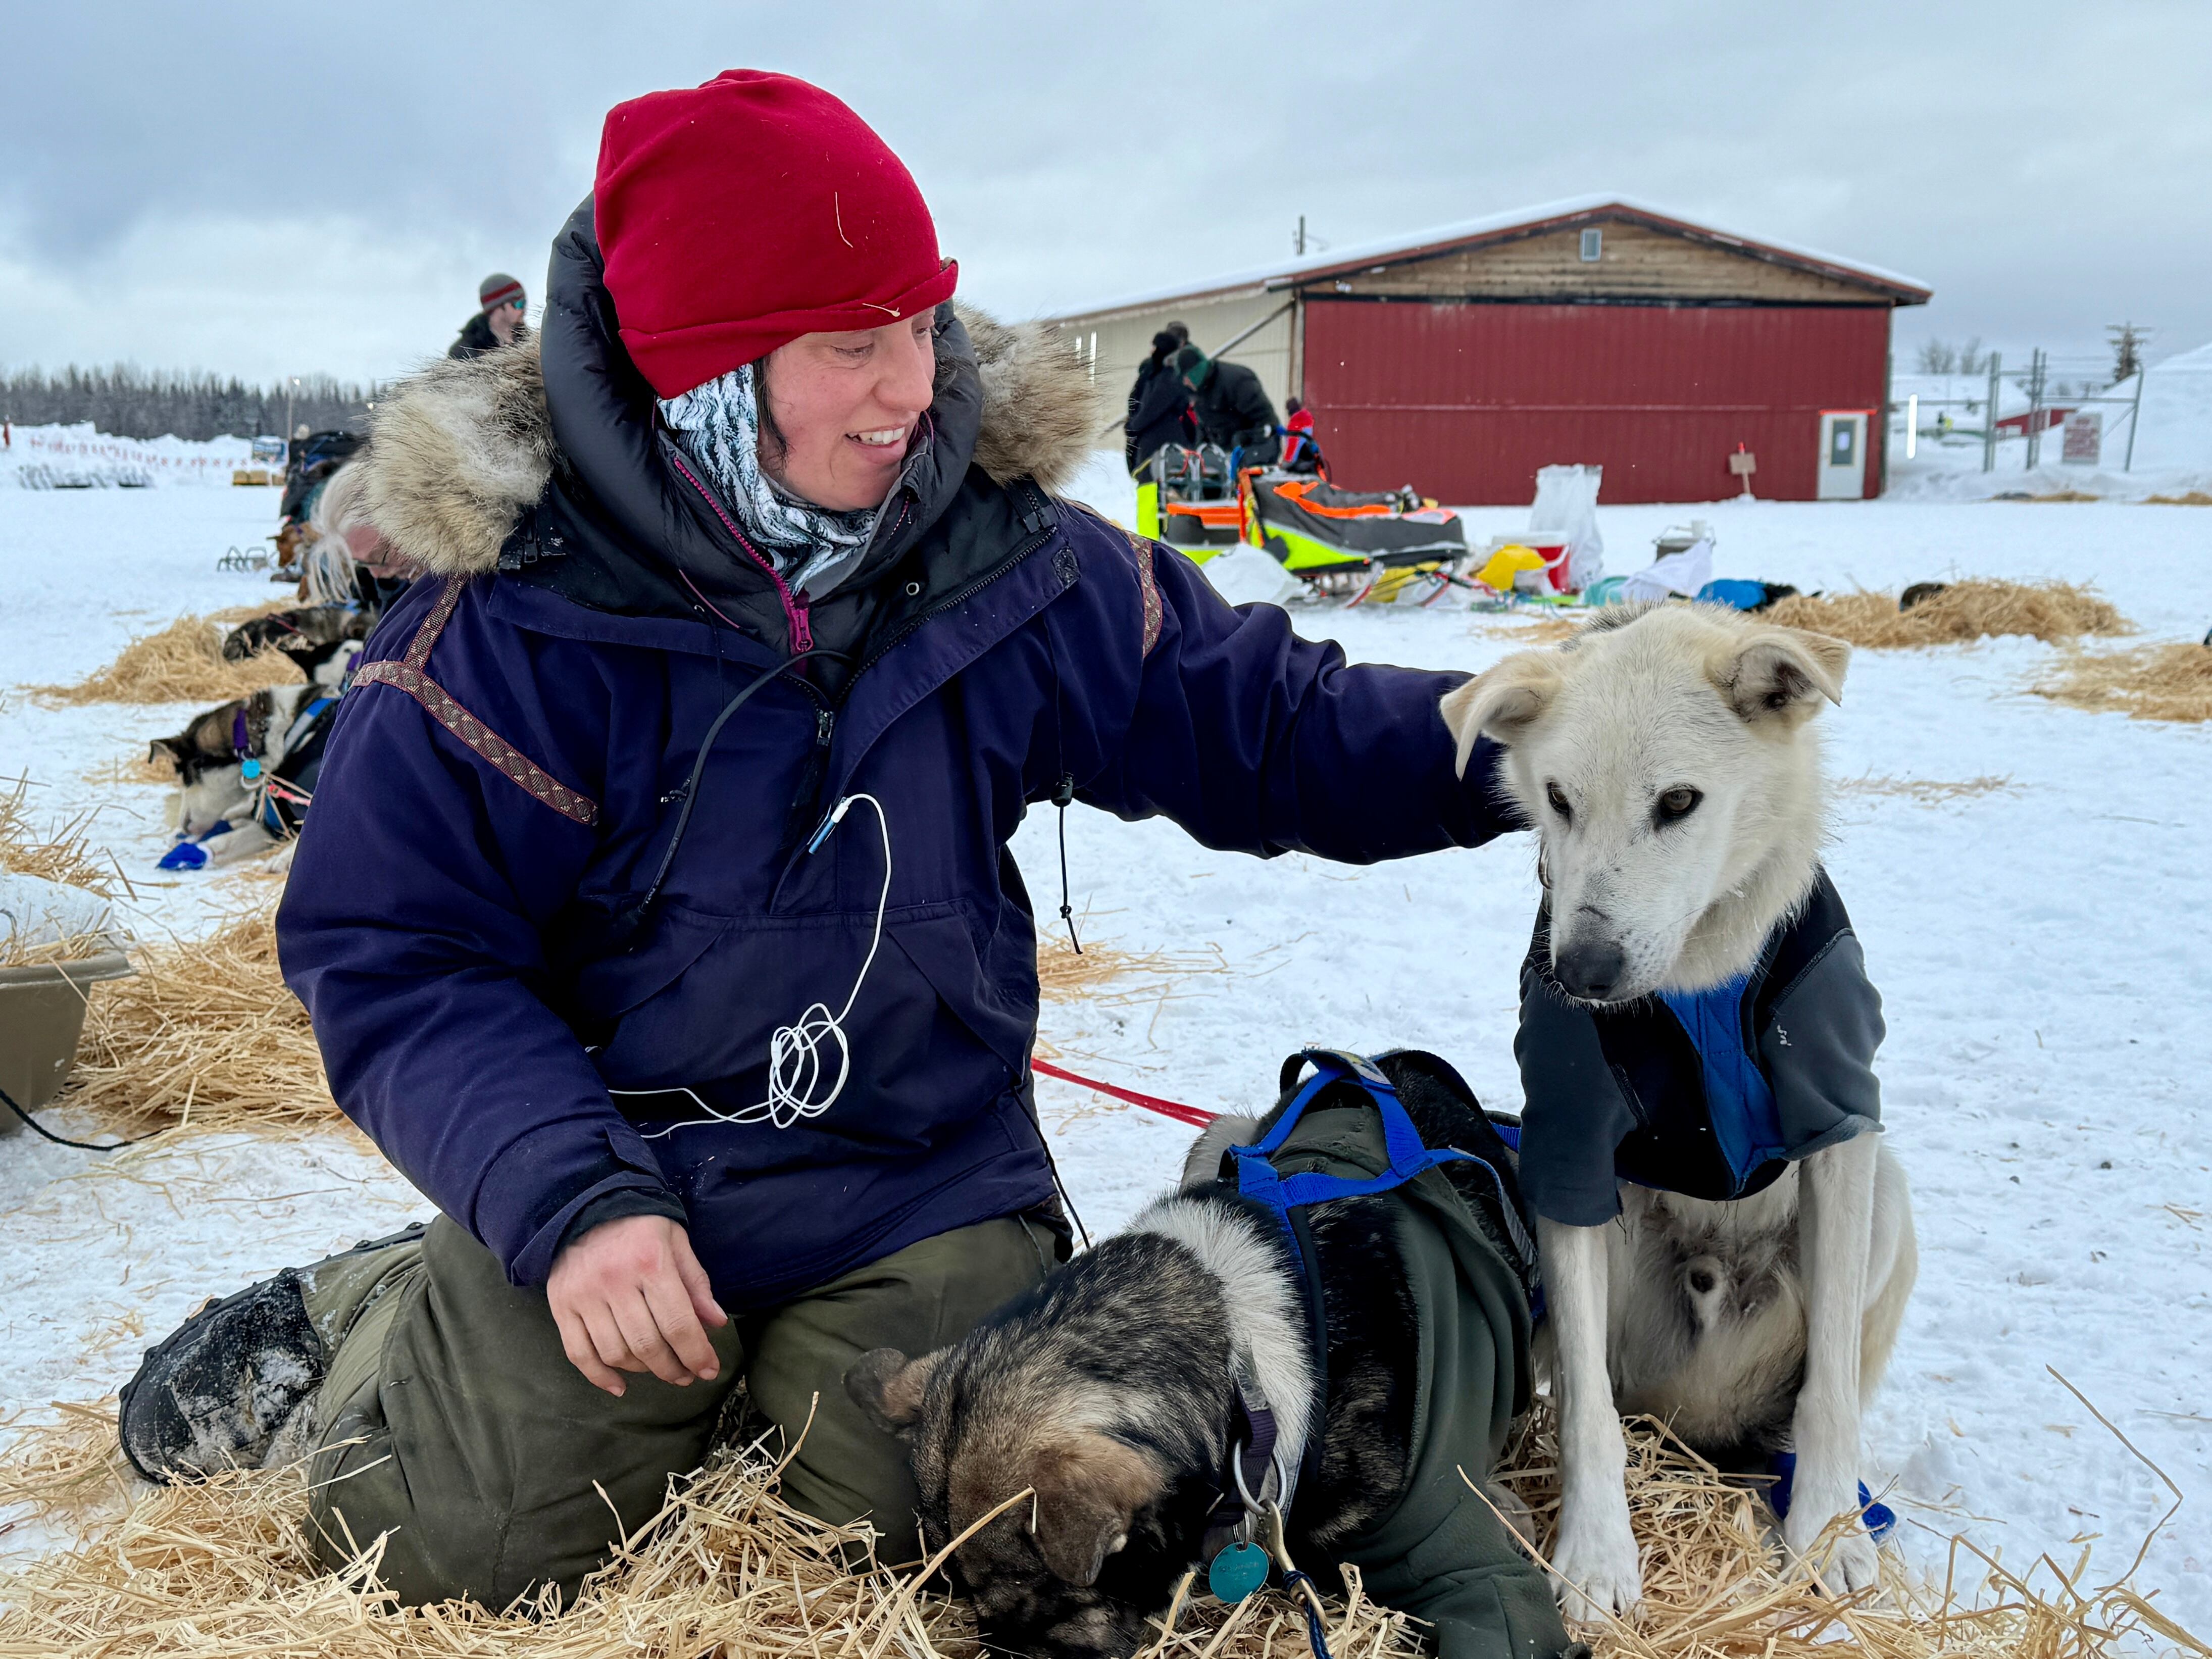 Rookie musher Erin Altemus poses with her dogs in McGrath at mile 311 along the Iditarod Trail.